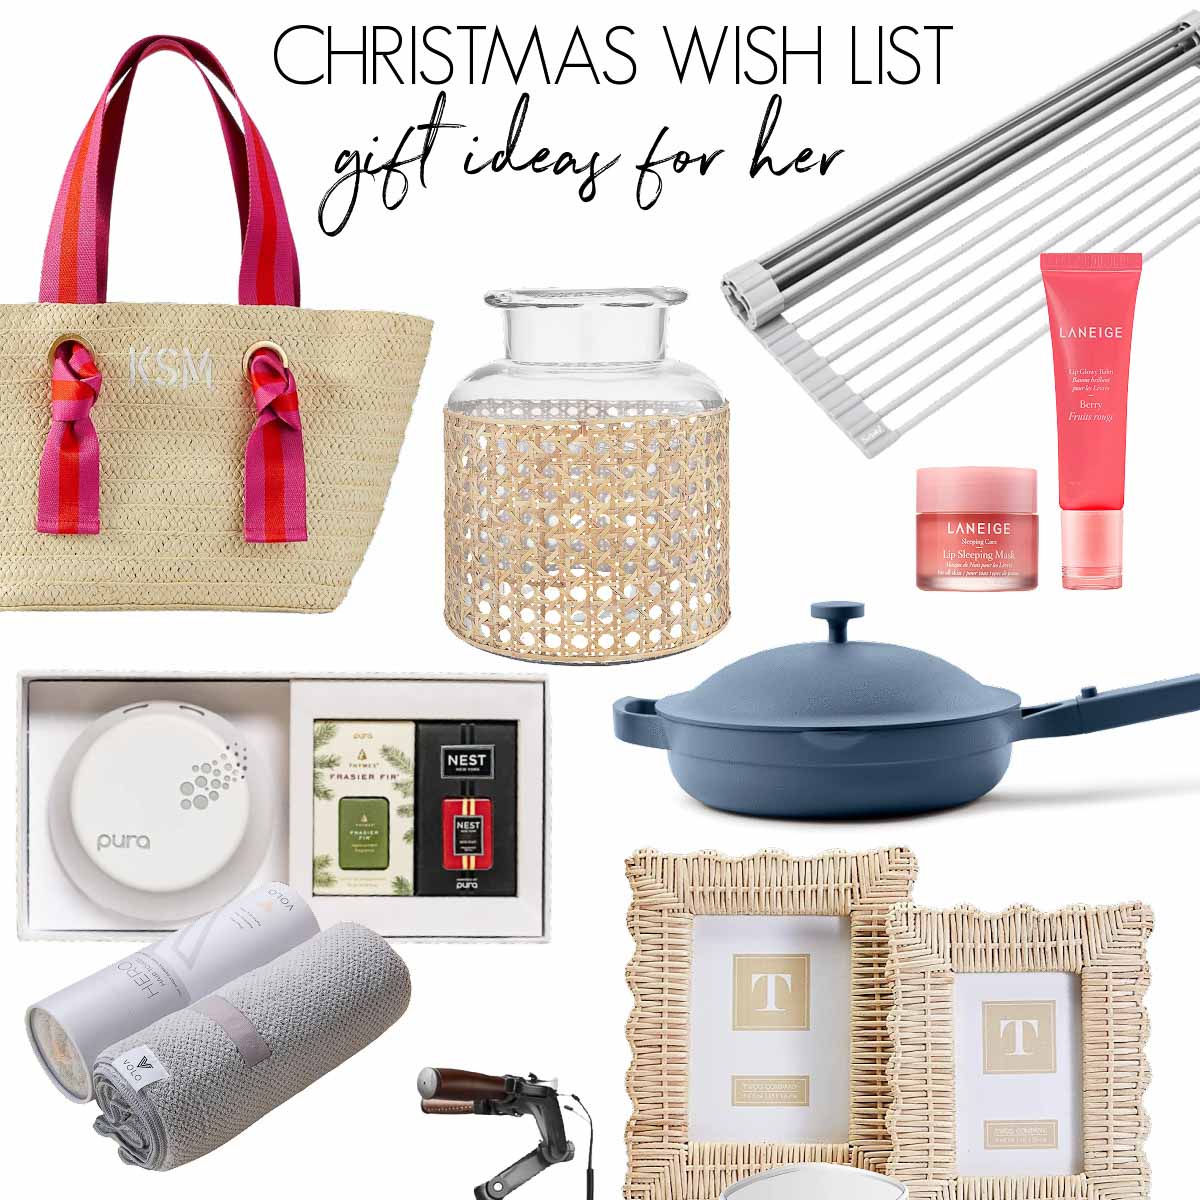 Christmas Wish List Ideas My Family's Favorite Gifts! Driven by Decor